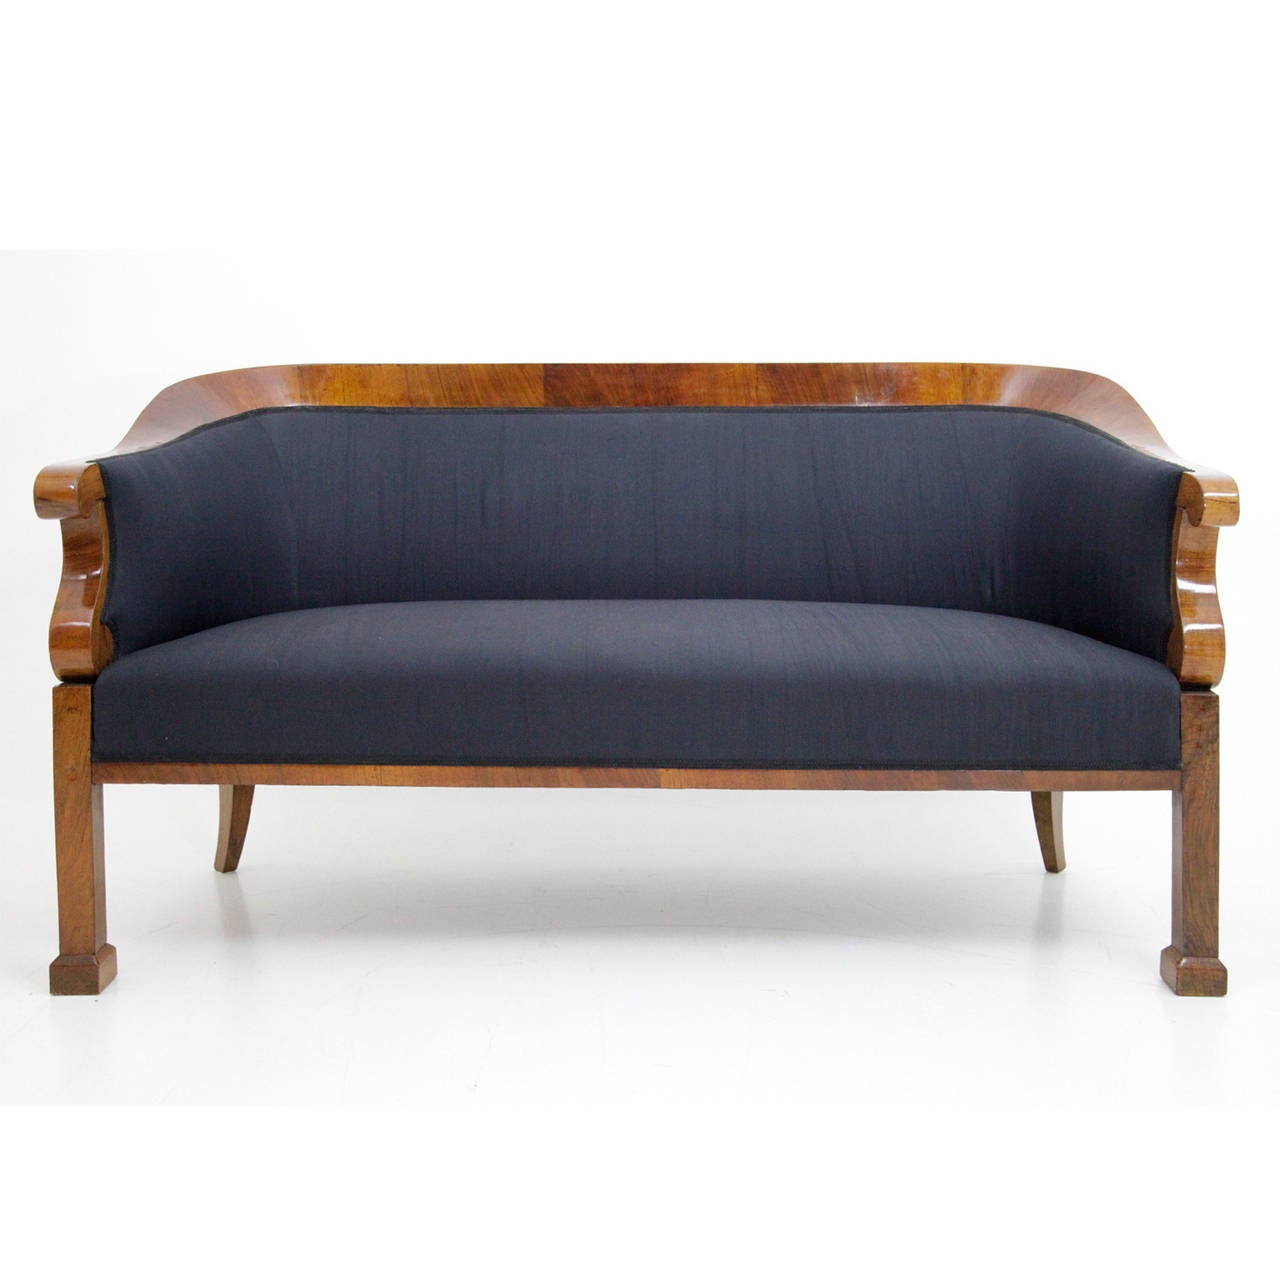 Beautiful Seating Ensemble consisting of a Bench and a pair Bergère in Biedermeier style, 2nd half 19th Century, Danube Monarchy. 
Walnut veneer, the upholstery fabric is held in a beautiful midnight blue.
Wide of the bench: 57.1 inches (145 cm)